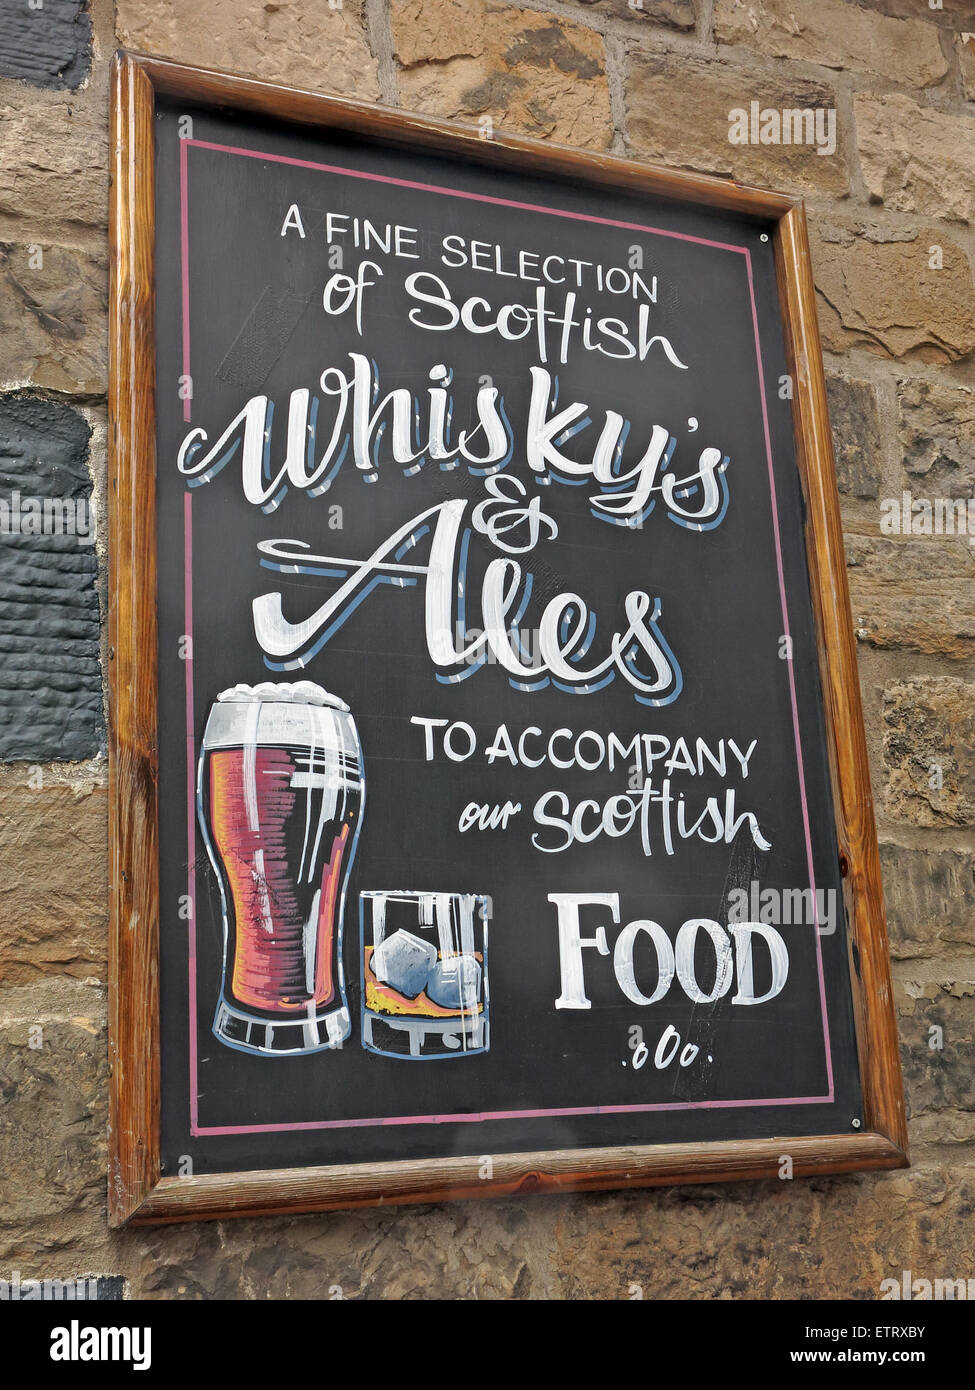 Sign, A fine selection of Scottish Whiskys & ales to accompany our Scottish food Stock Photo